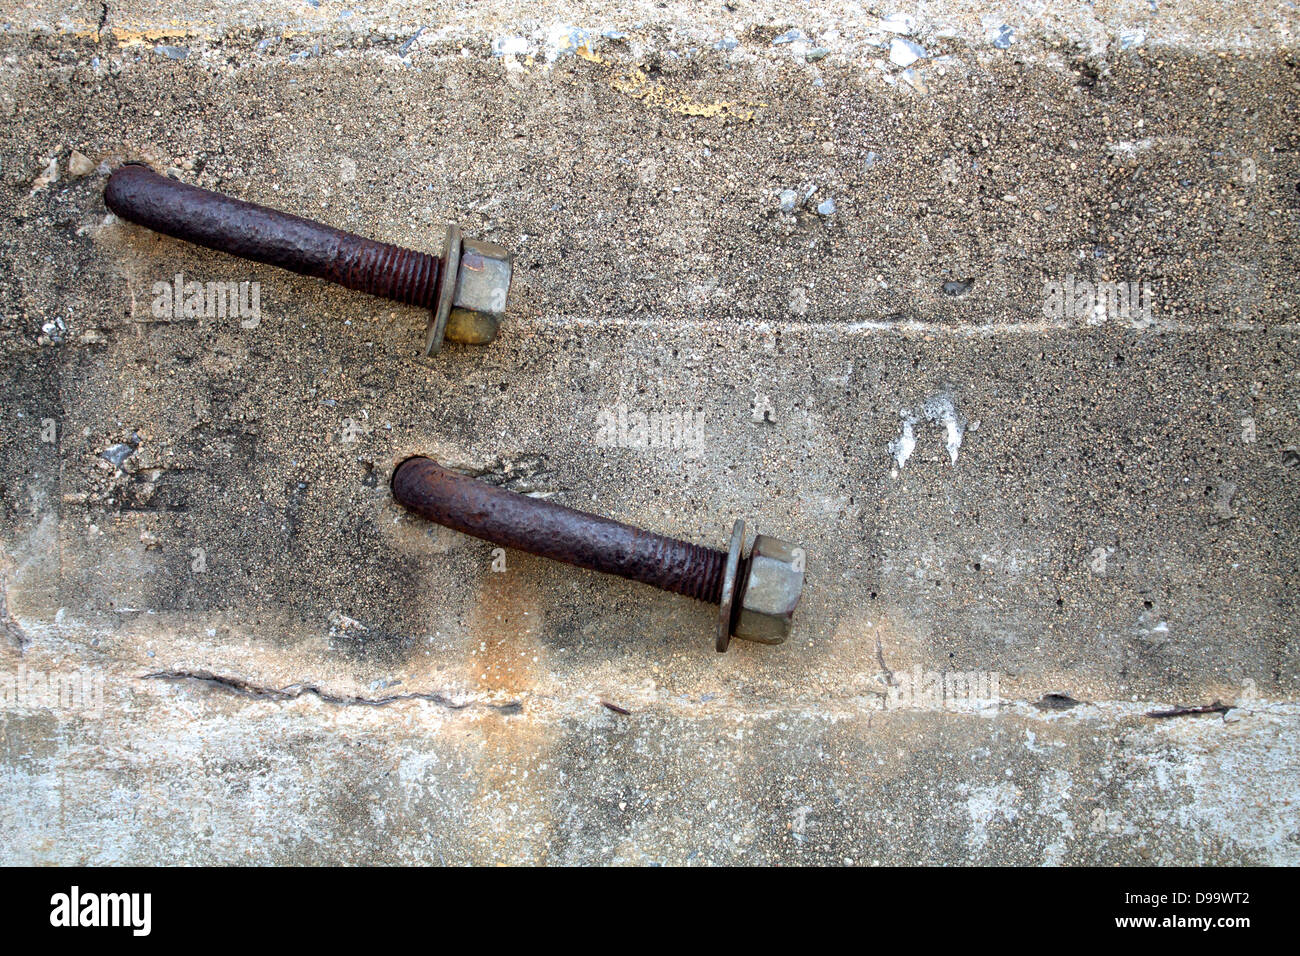 Two Rusty Bent Lag Bolt in Concrete. Stock Photo